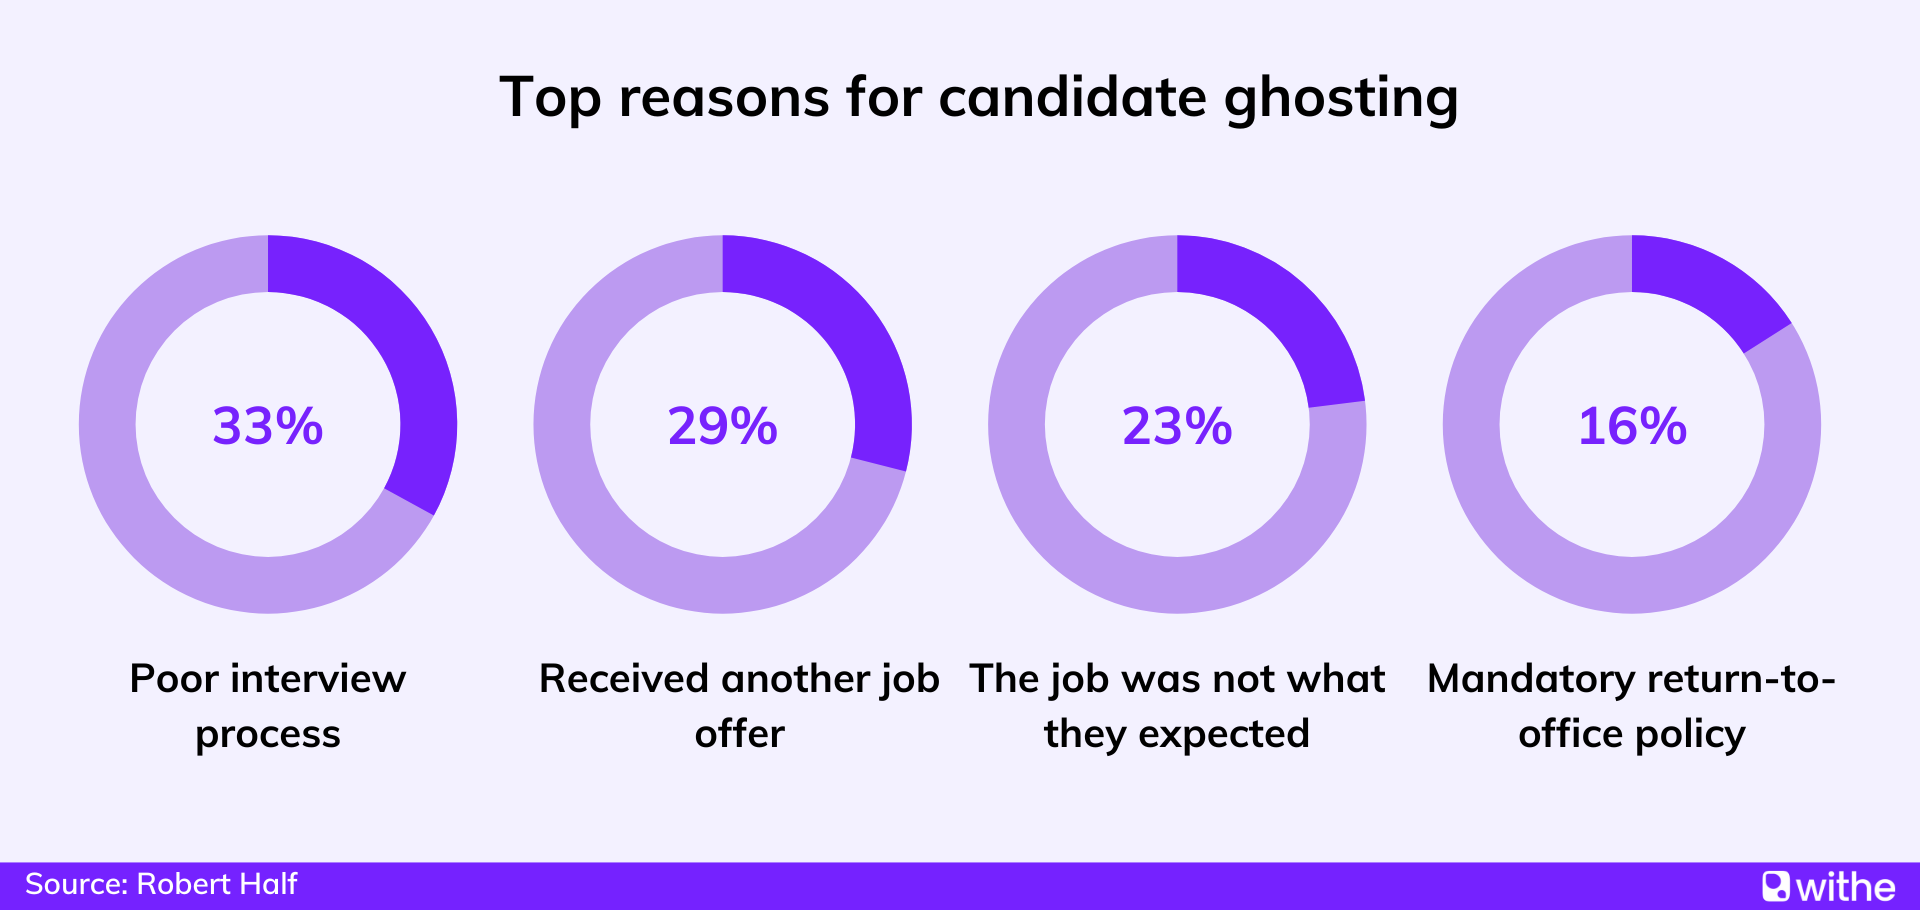 The top 4 reasons for candidate ghosting